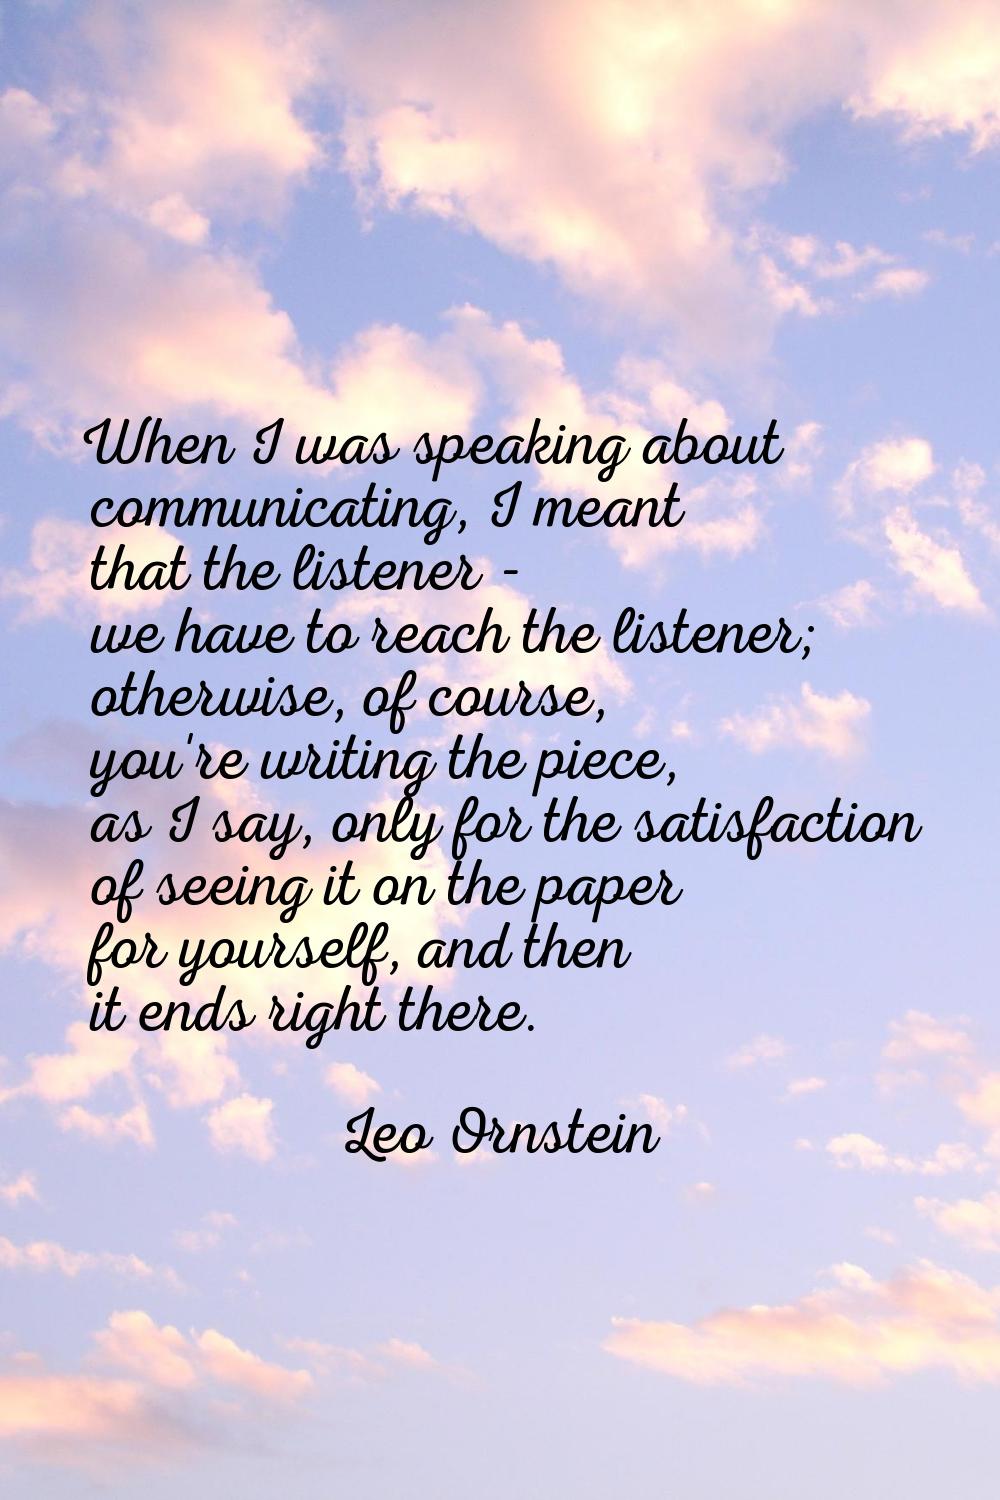 When I was speaking about communicating, I meant that the listener - we have to reach the listener;